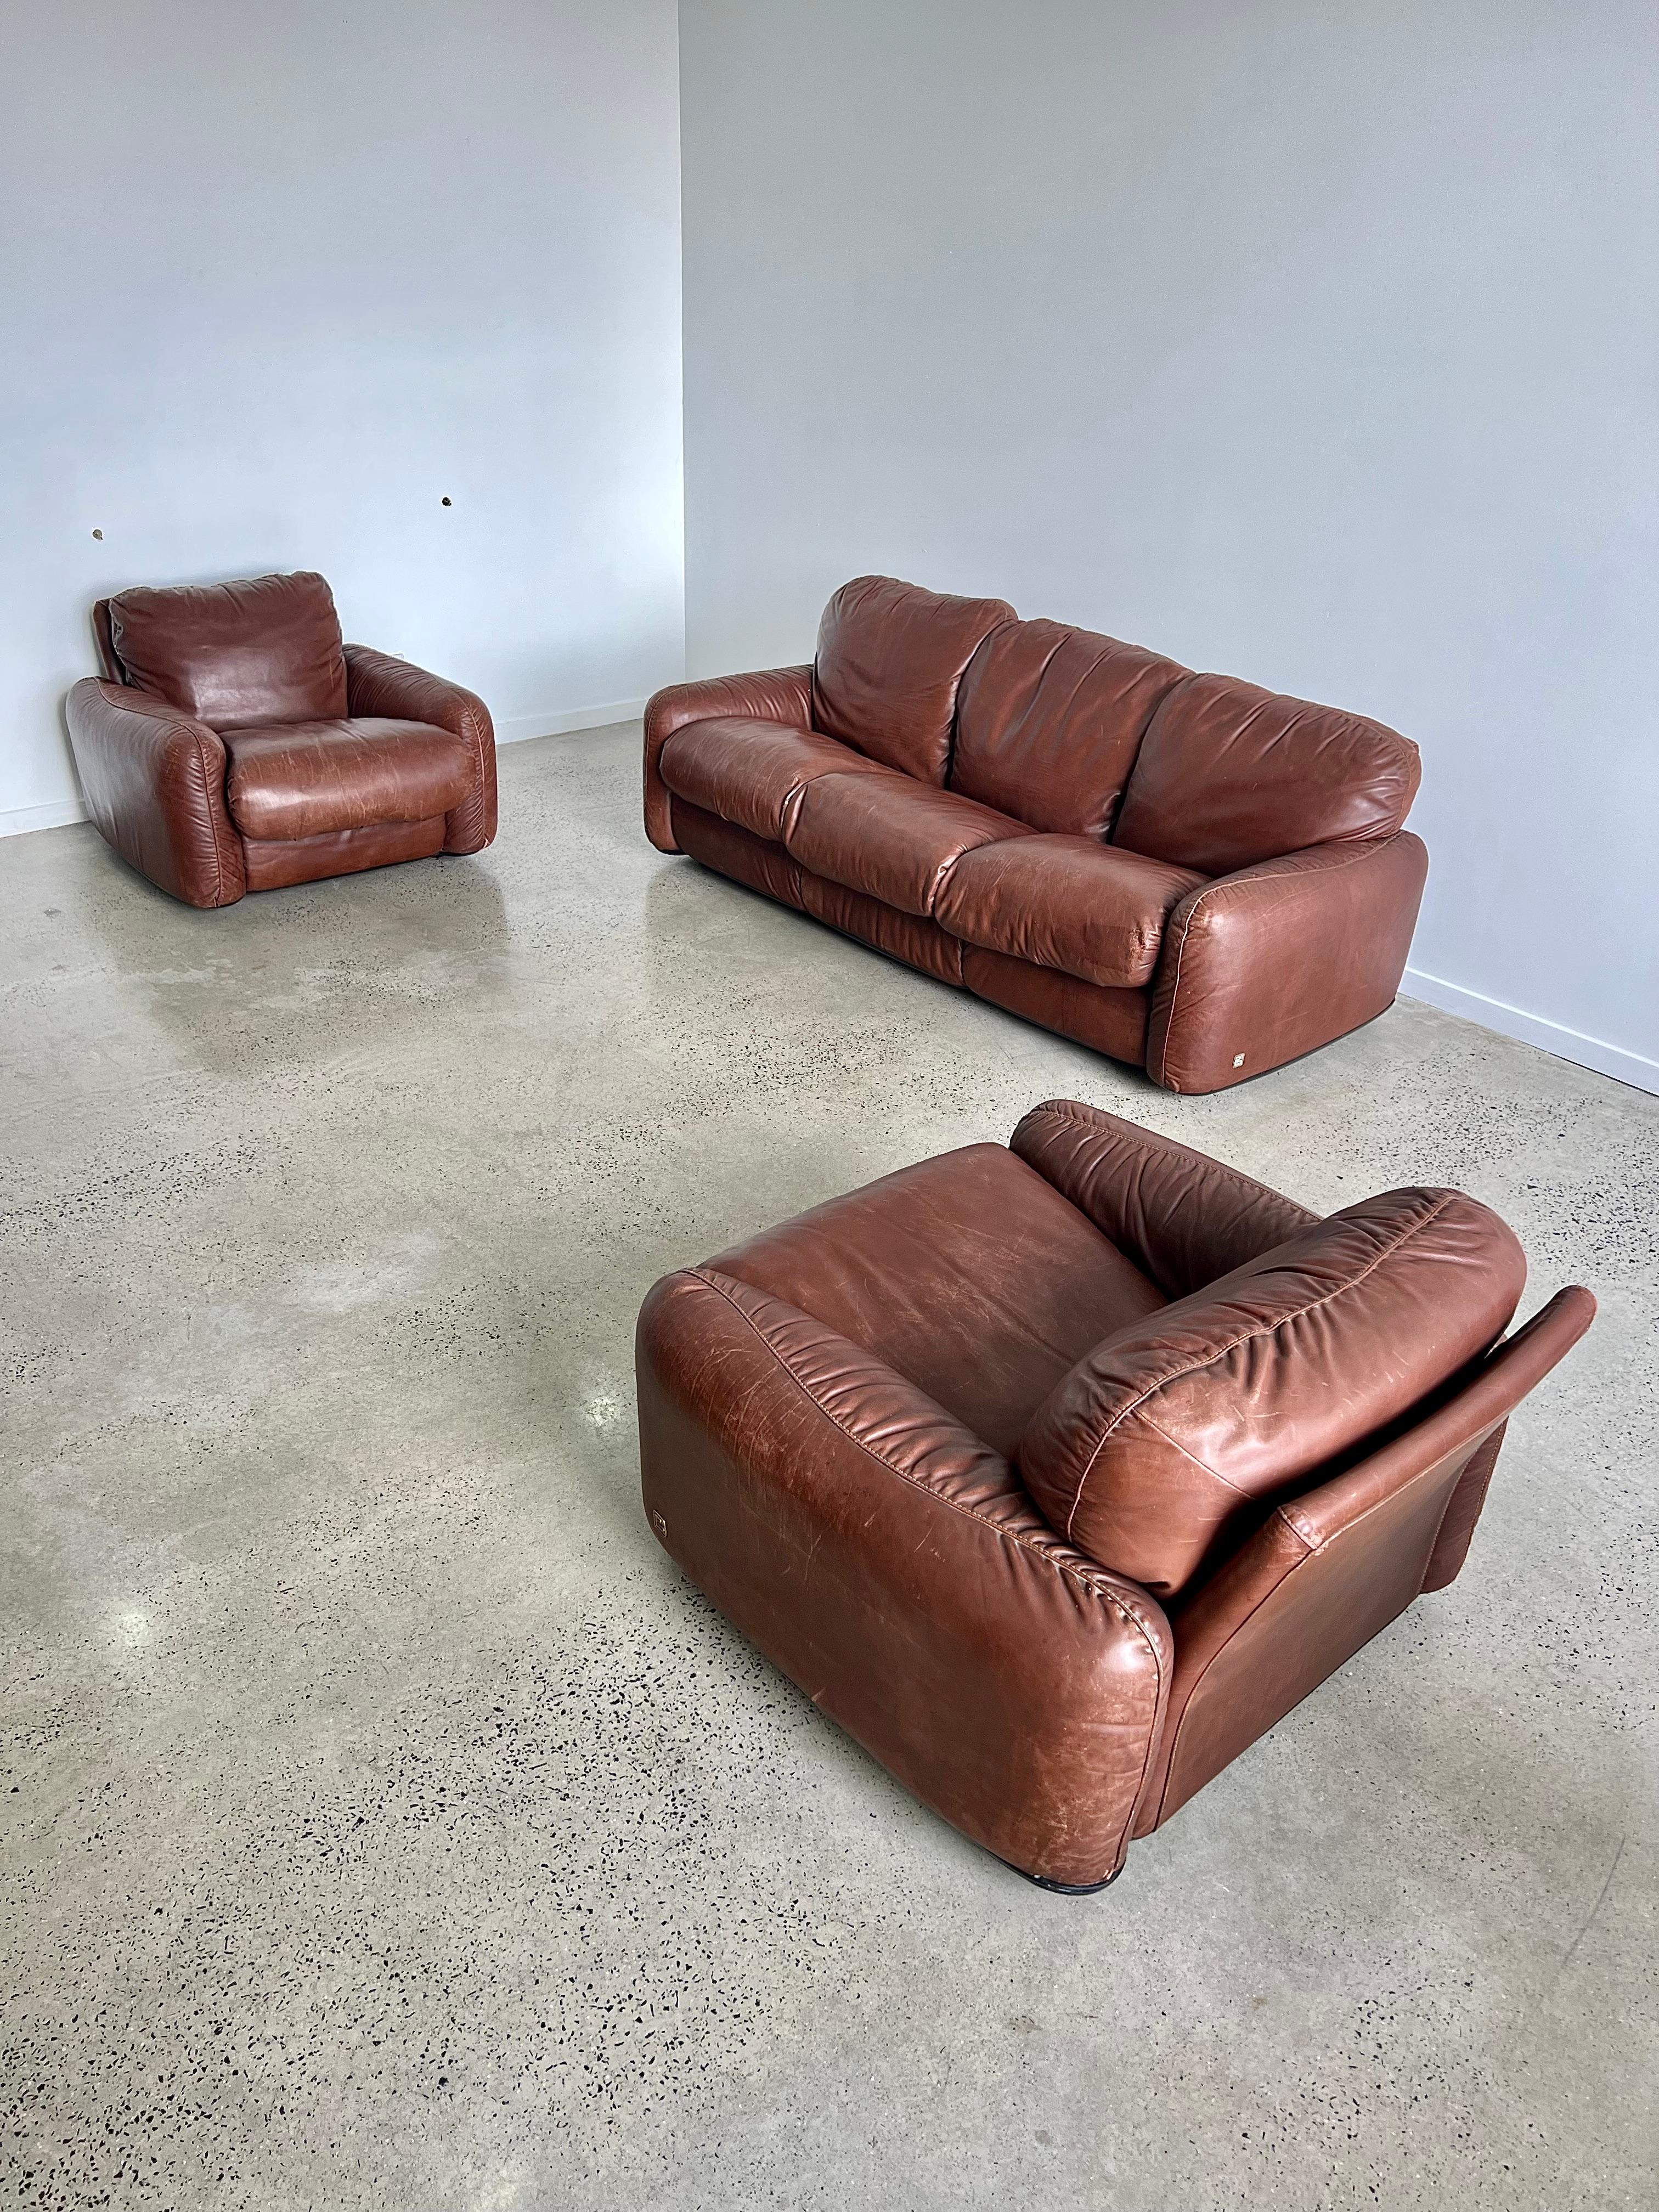 “Piumotto” Set of three seater dark brown leather sofa and two armchairs by Arrigo Arrigoni for Busnelli 1970s.


Sofa dimensions:
Height: 66 cm
Width: 190 cm
Depth:  85 cm

Armchairs Dimension: 
Height: 66 cm
Width:  90 cm
Depth:  85 cm